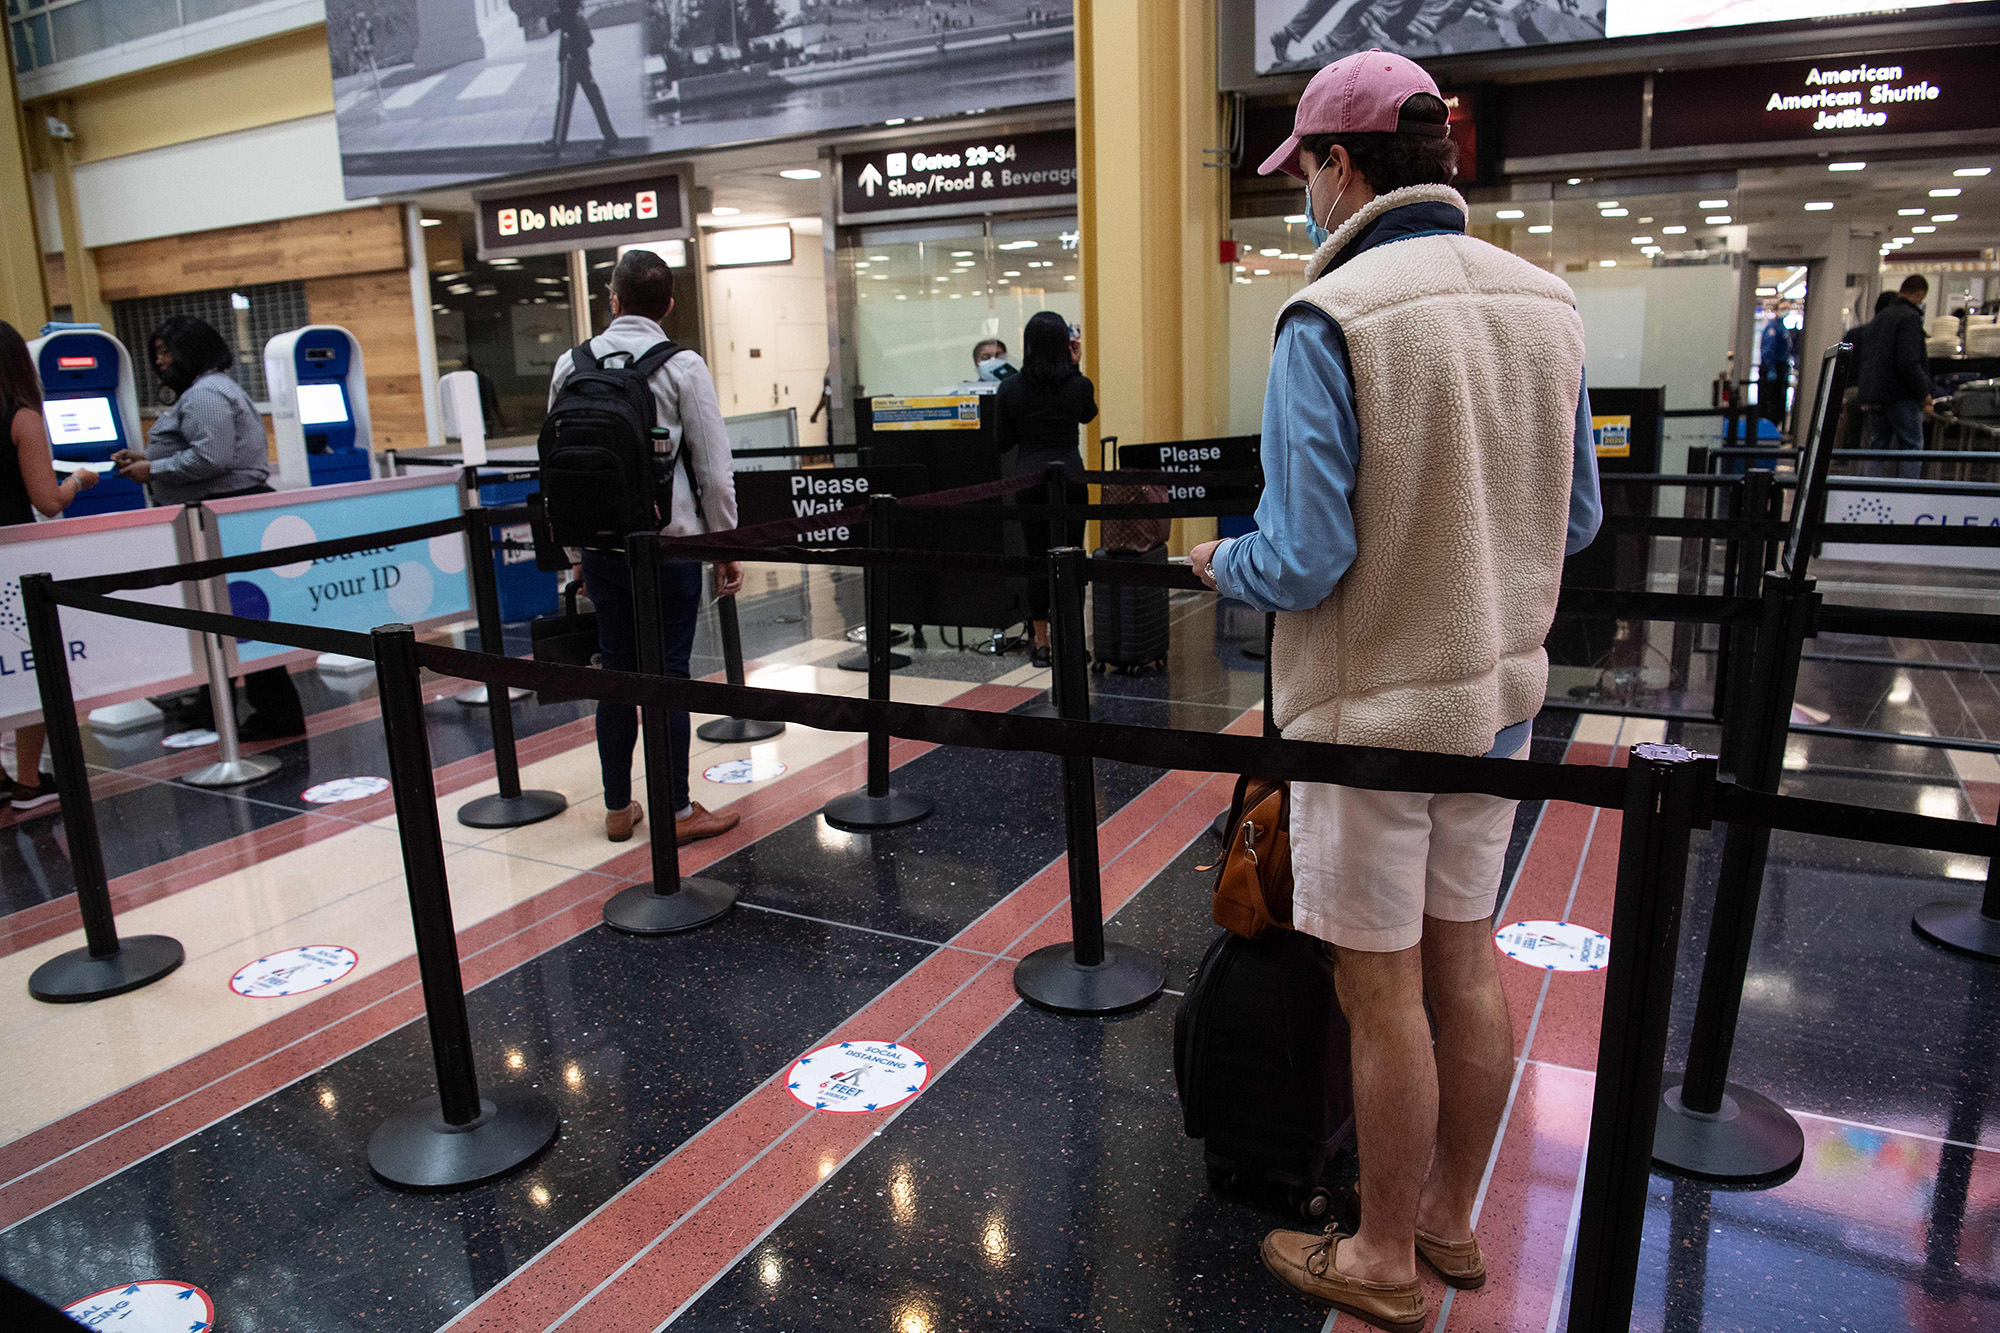 People wait in line at a security checkpoint at Reagan National Airport in Arlington, Virginia on May 22.